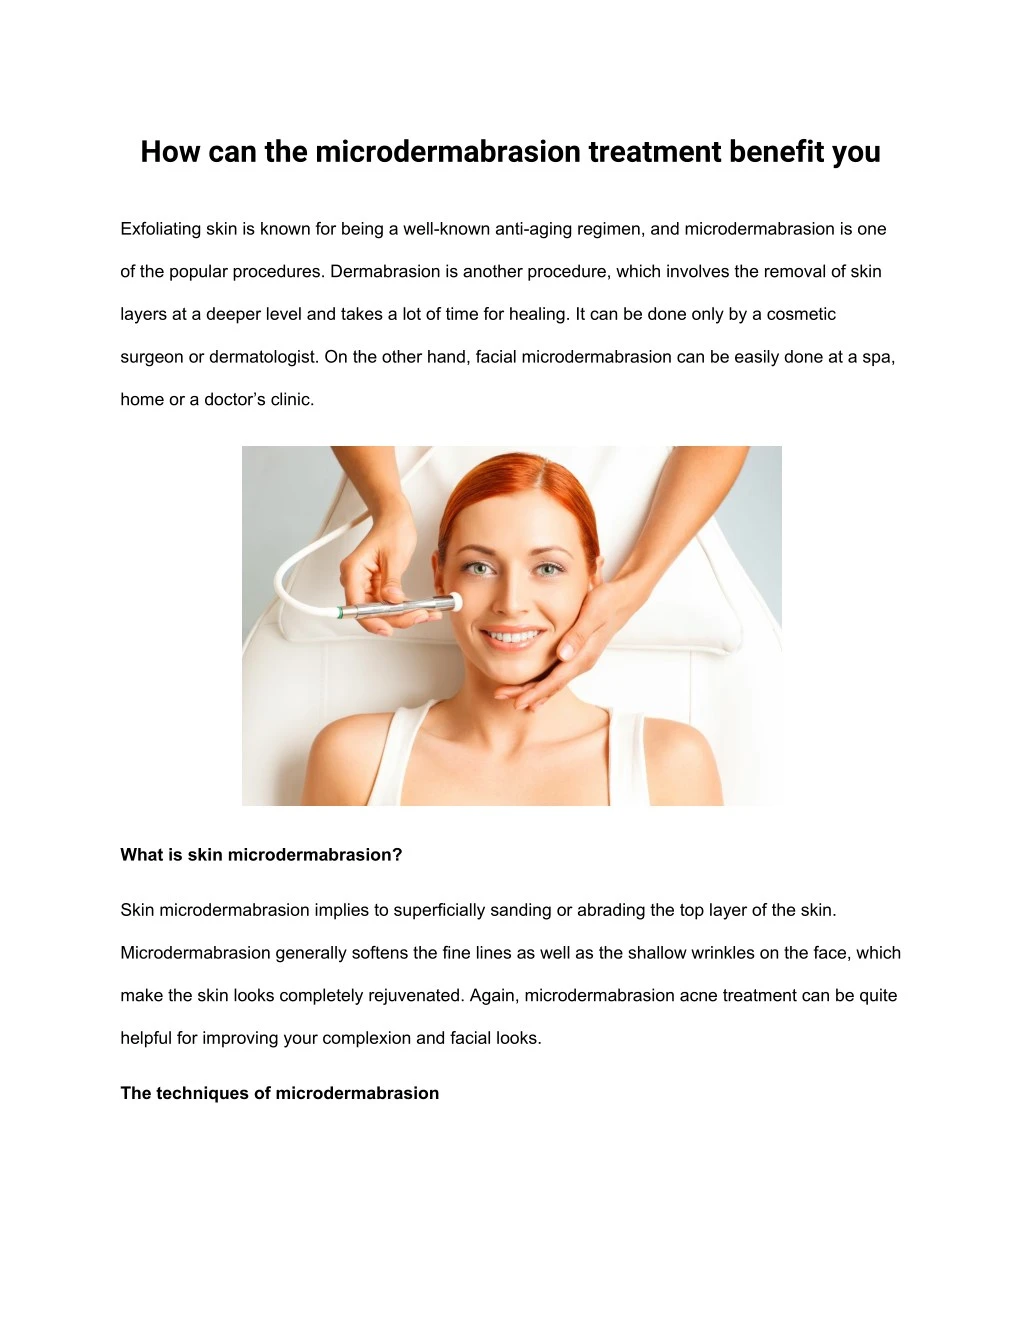 how can the microdermabrasion treatment benefit